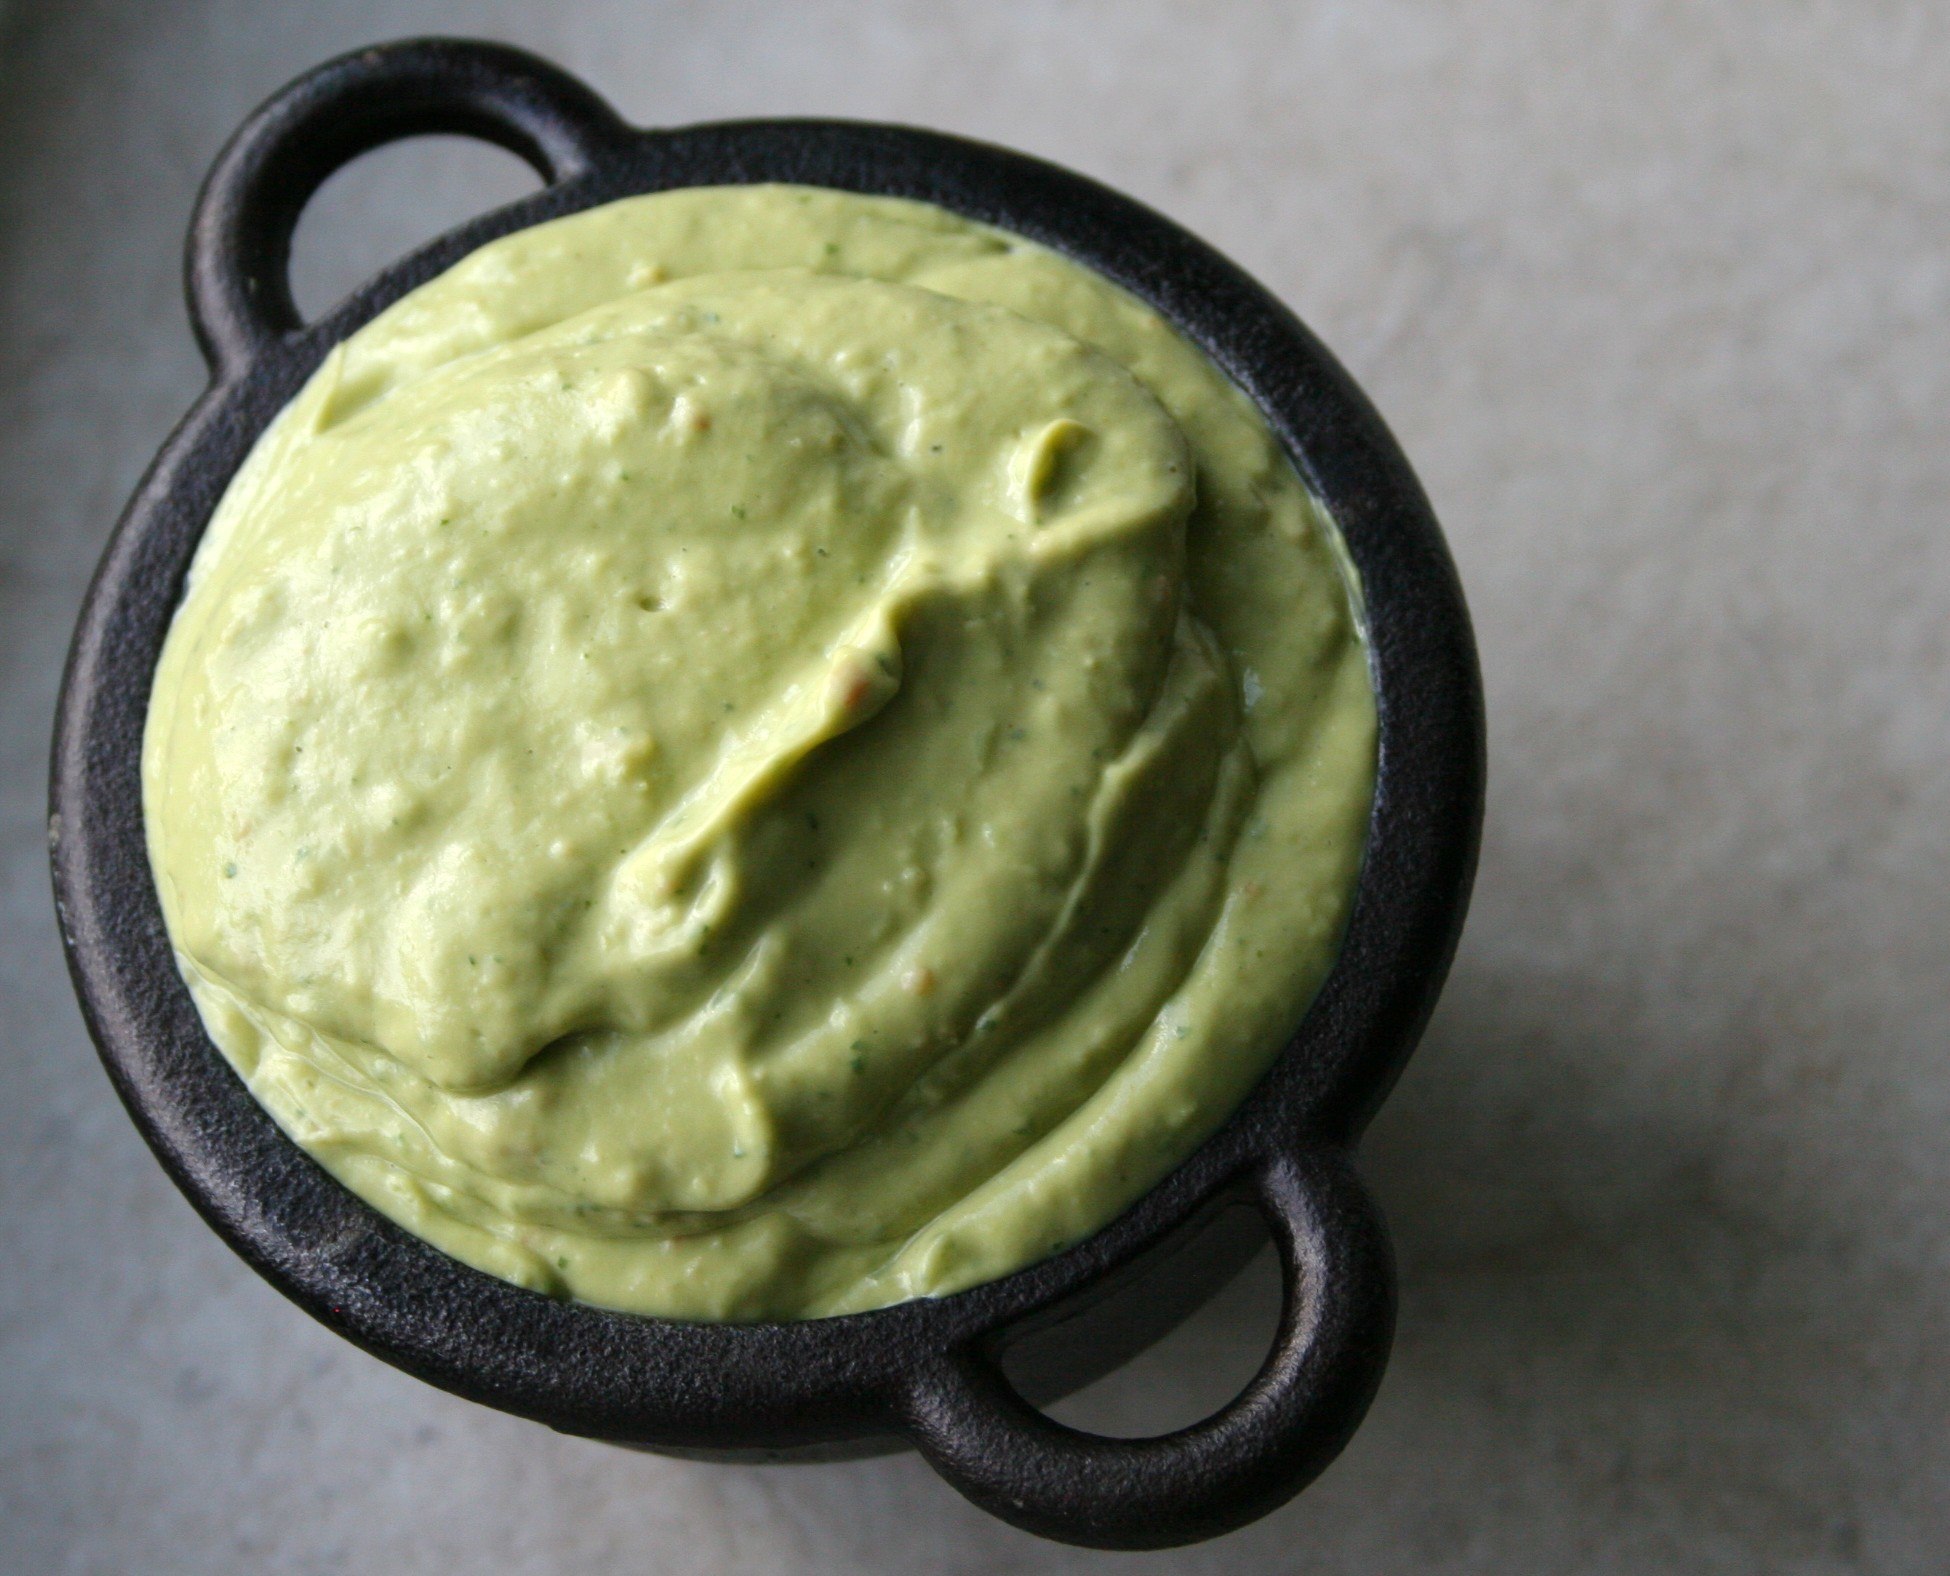 guac with blended tomatillo and tomato